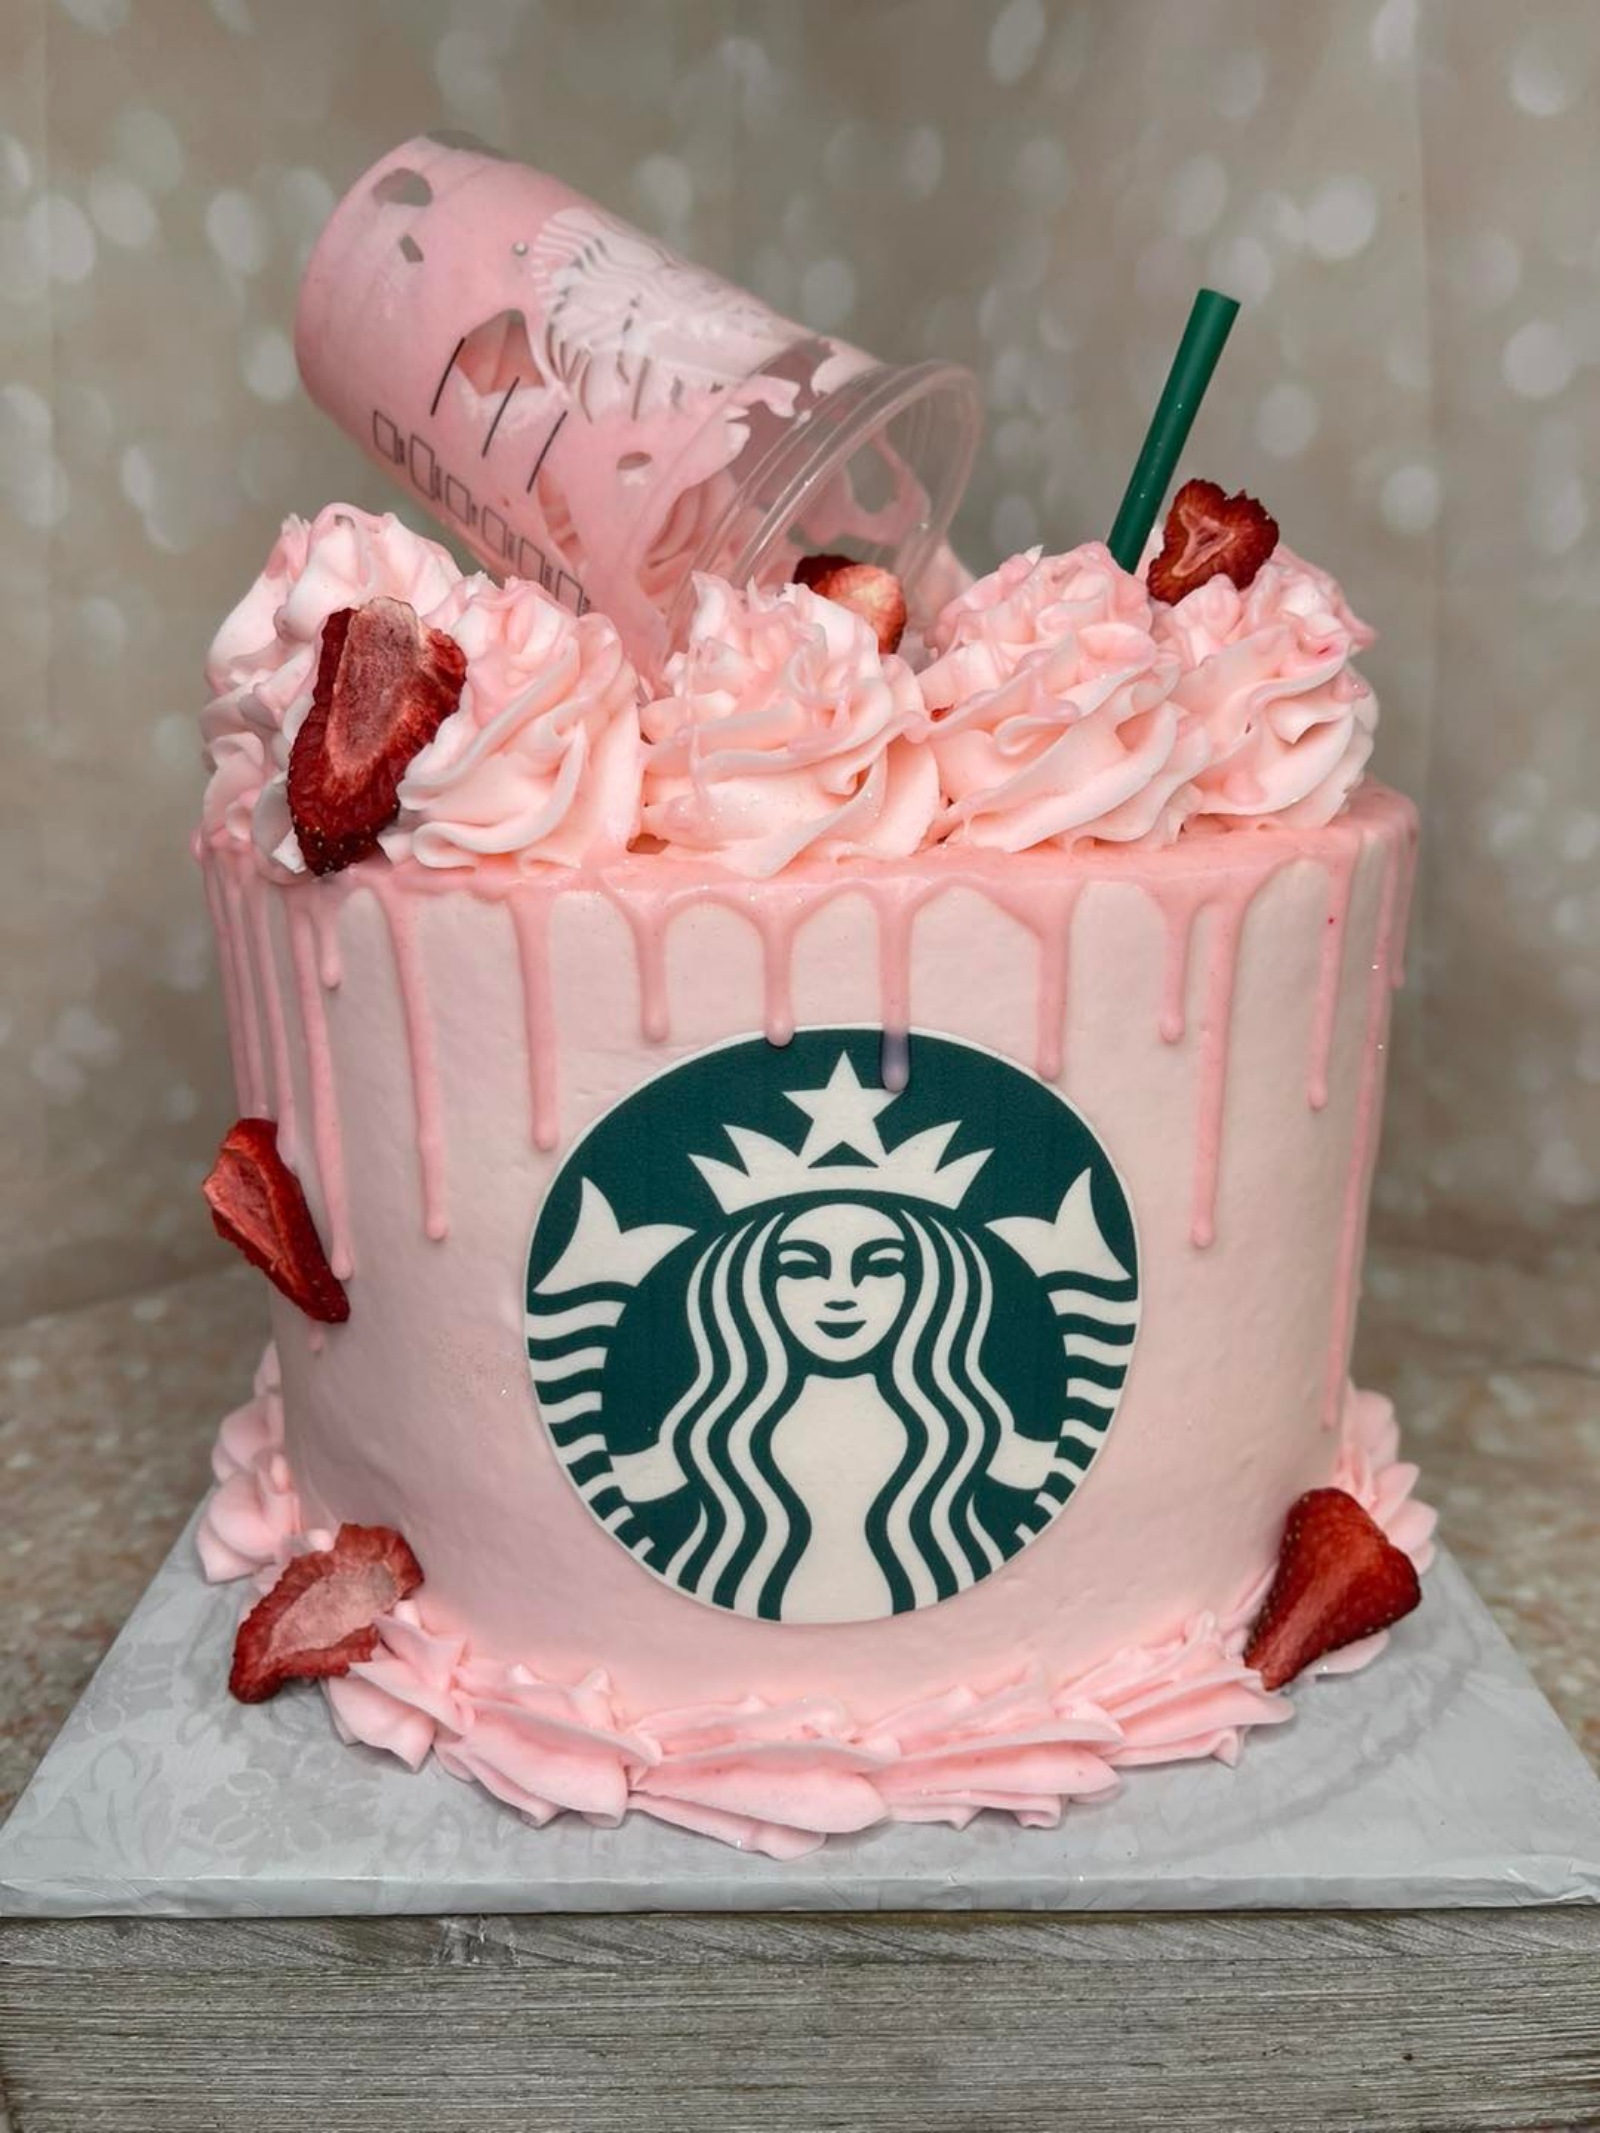 A pink cake decorated with a Starbucks logo and strawberries